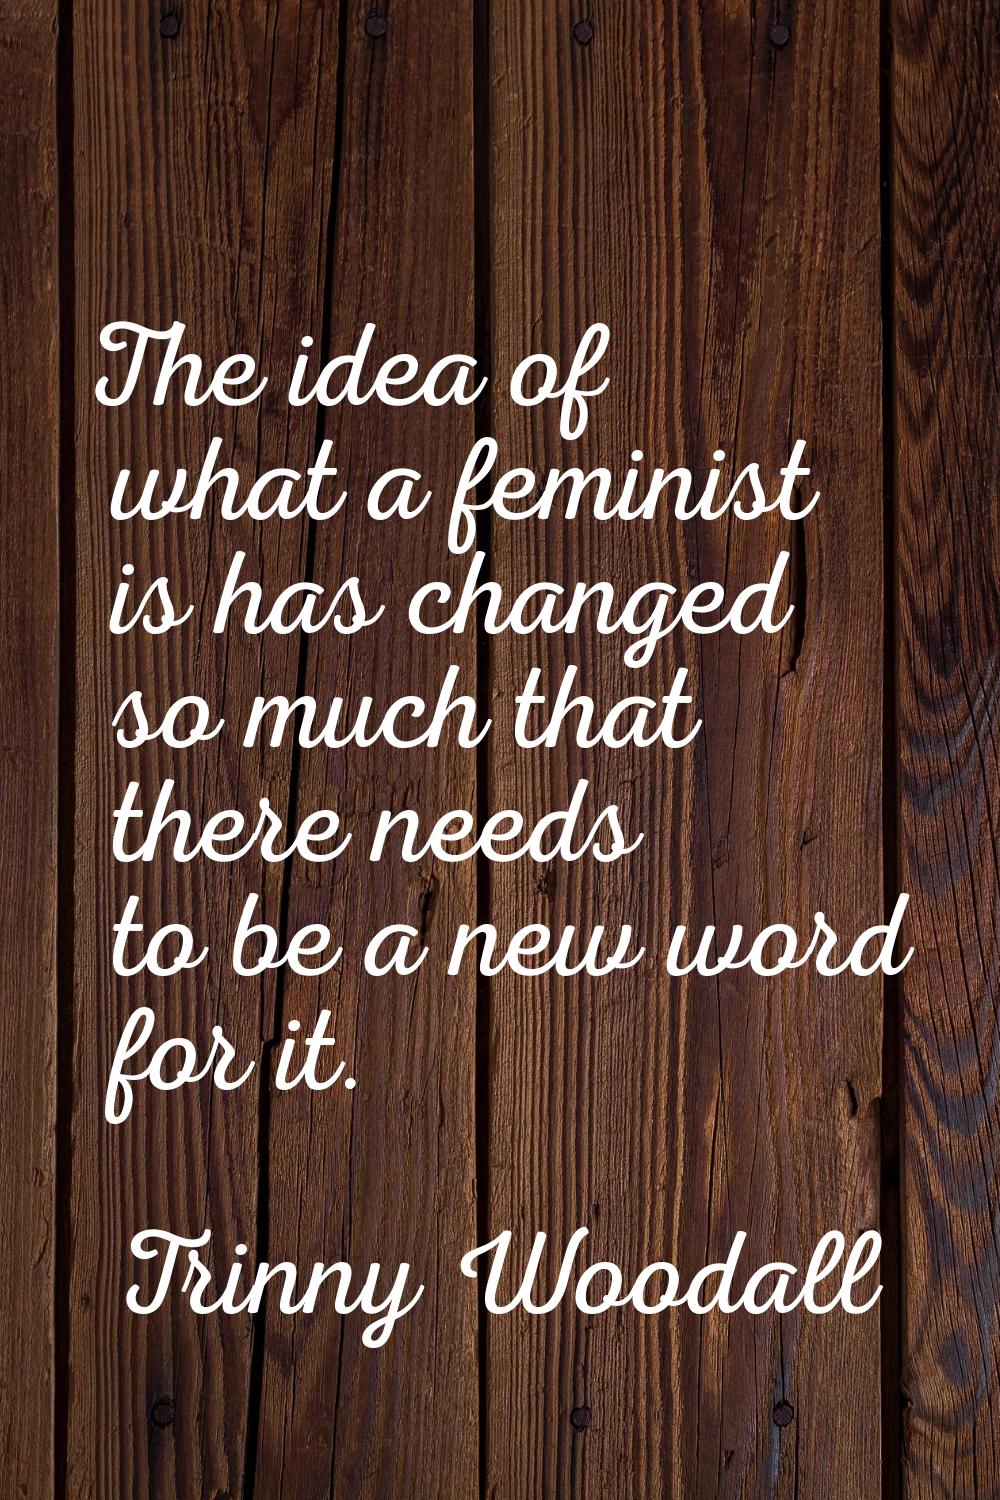 The idea of what a feminist is has changed so much that there needs to be a new word for it.